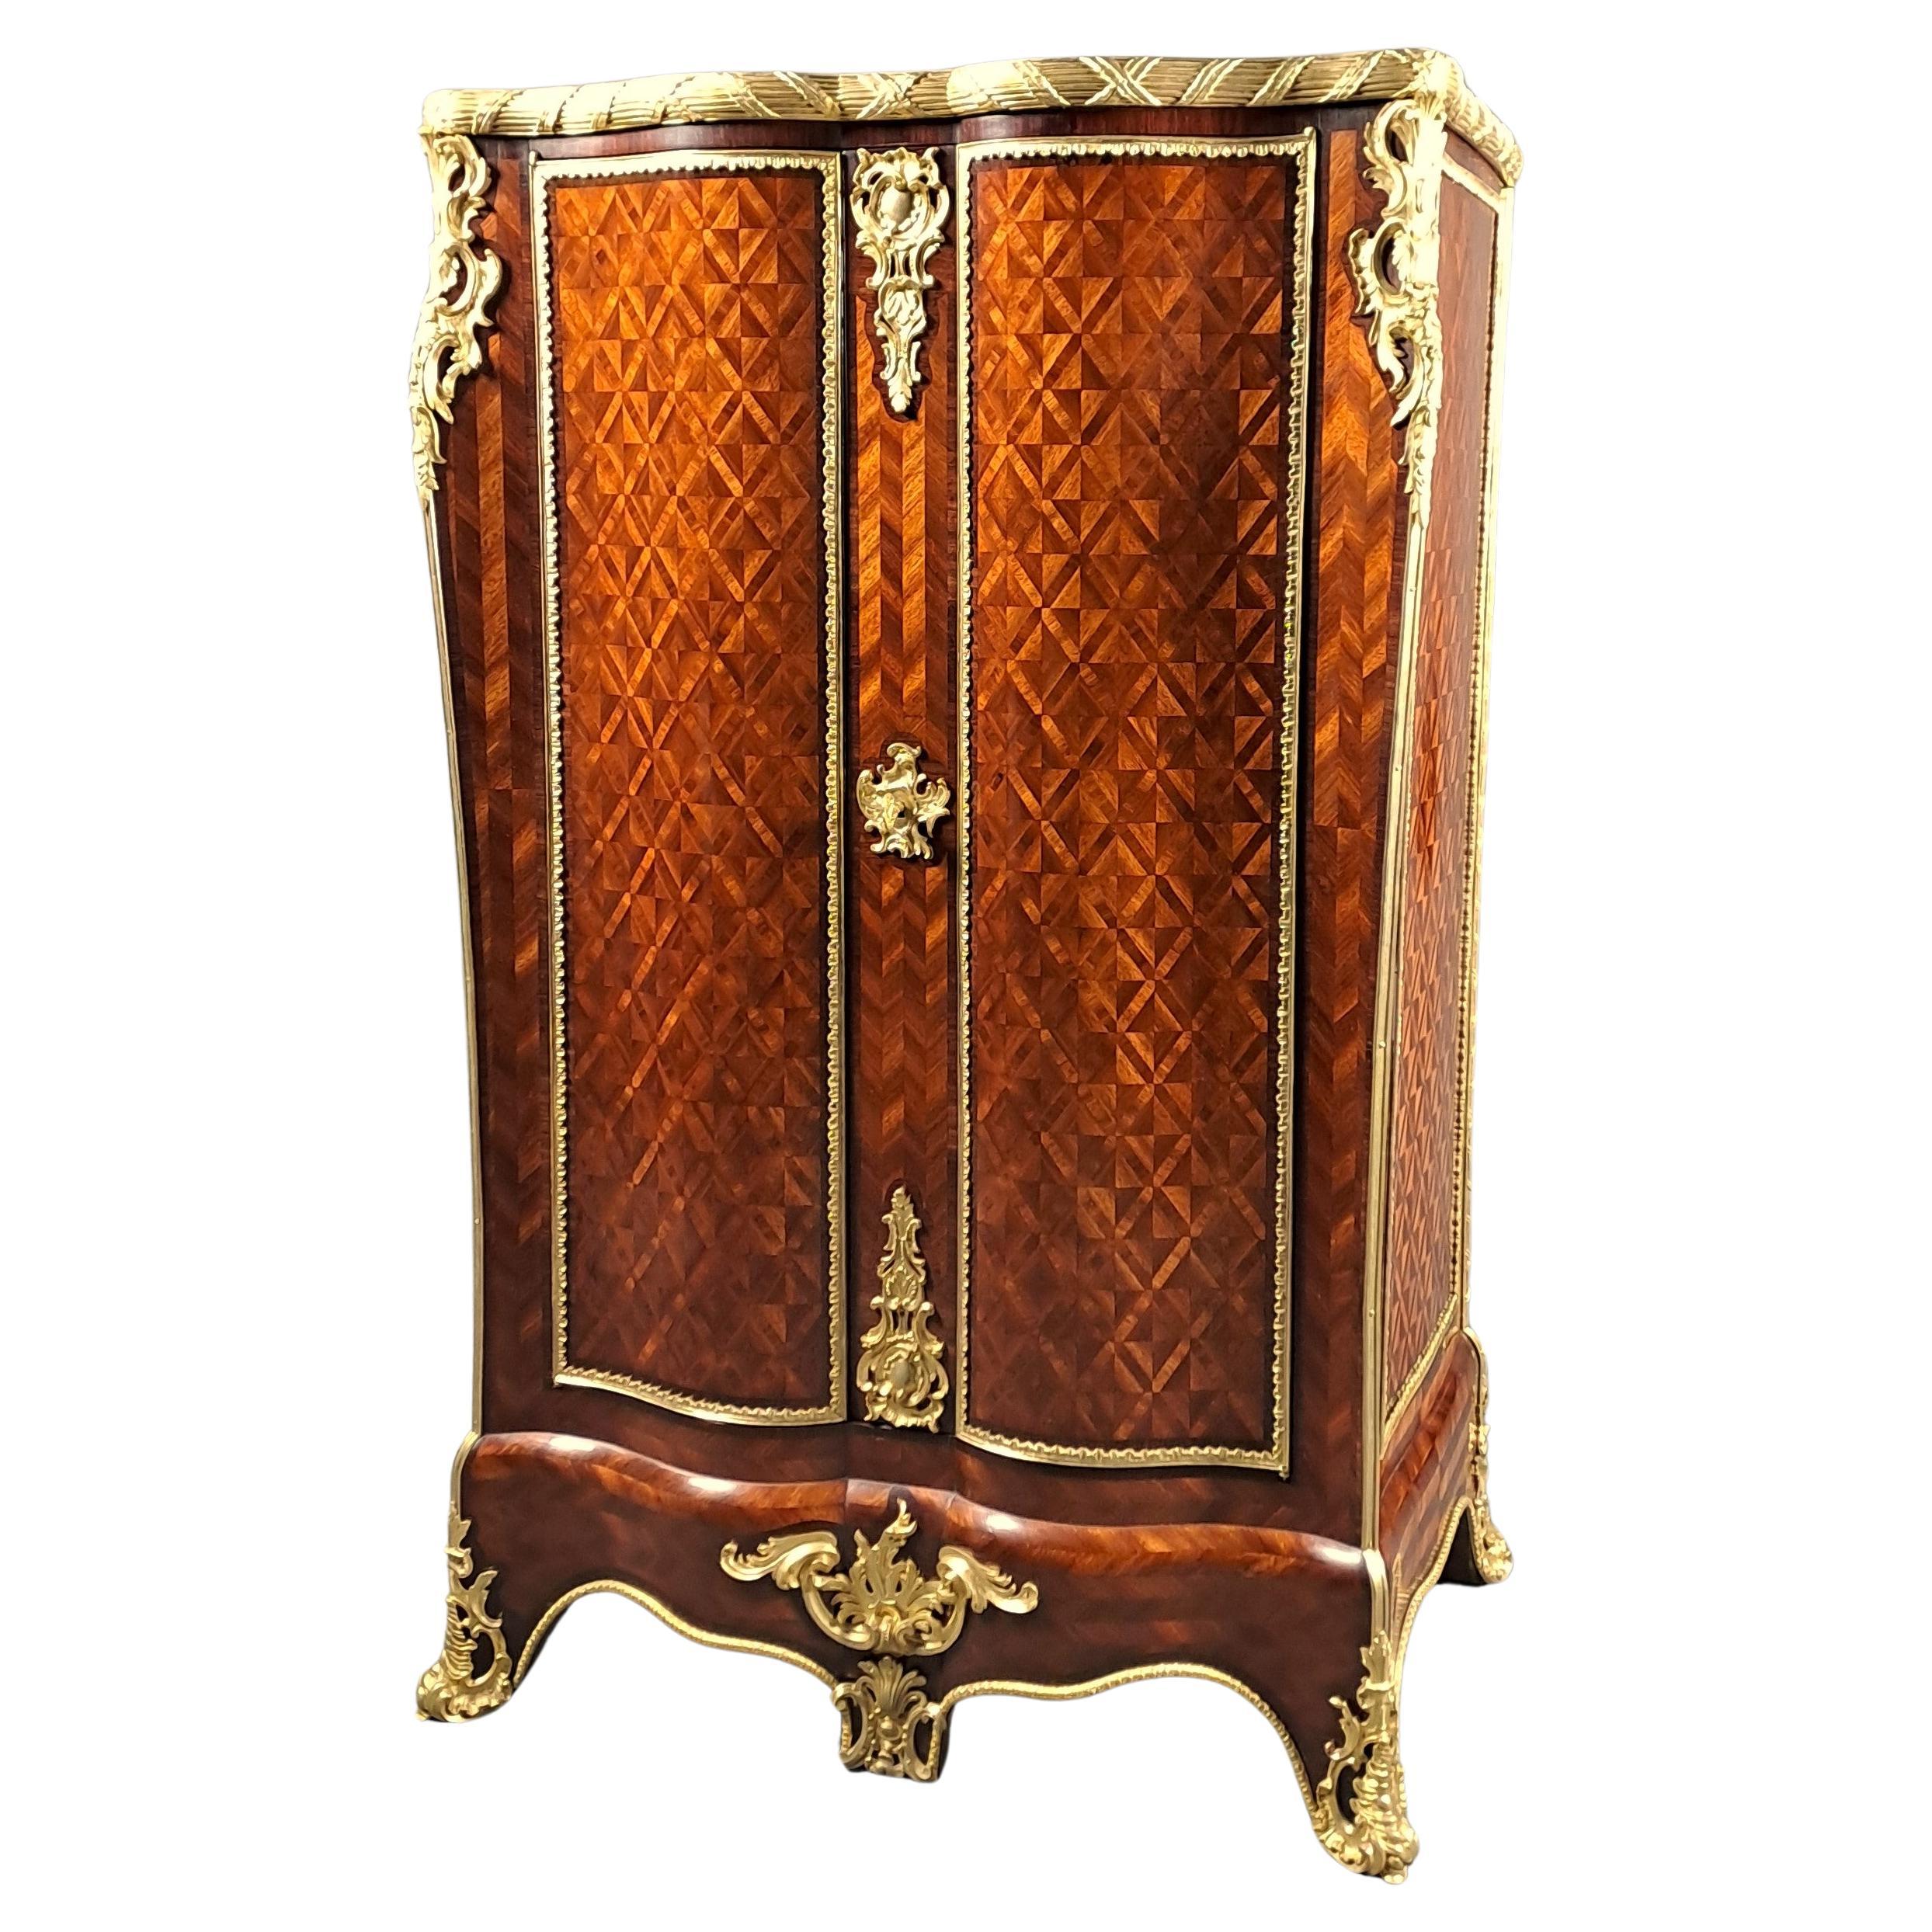 Important Cabinet Stamped Beurdeley In Paris For Sale